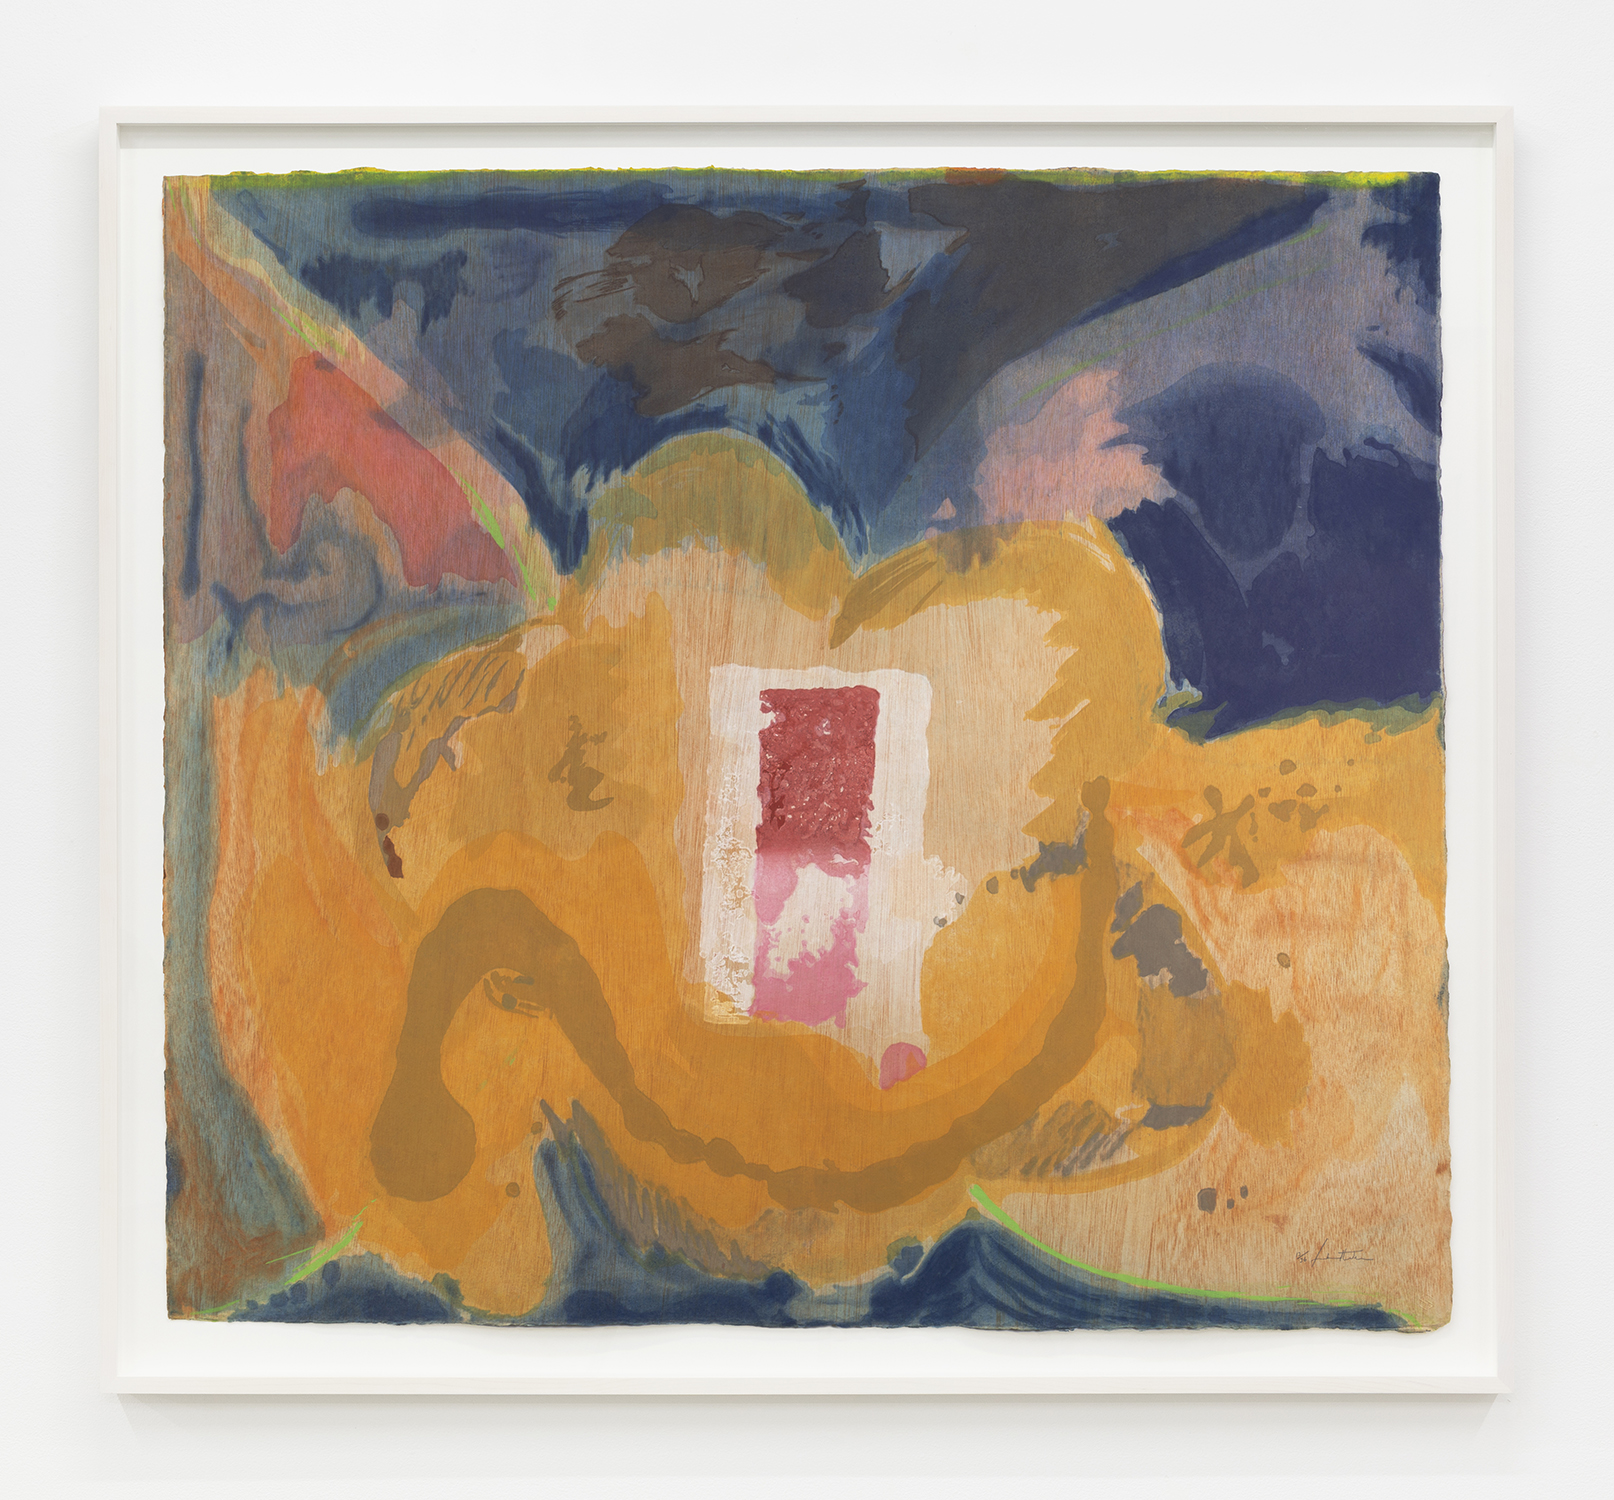 Helen Frankenthaler Tales of Genji V, 1998 Woodcut in 48 colors, stencil on rust, handmade paper 42 x 46 3/4 inches (106.7 x 118.7 cm) Edition of 36